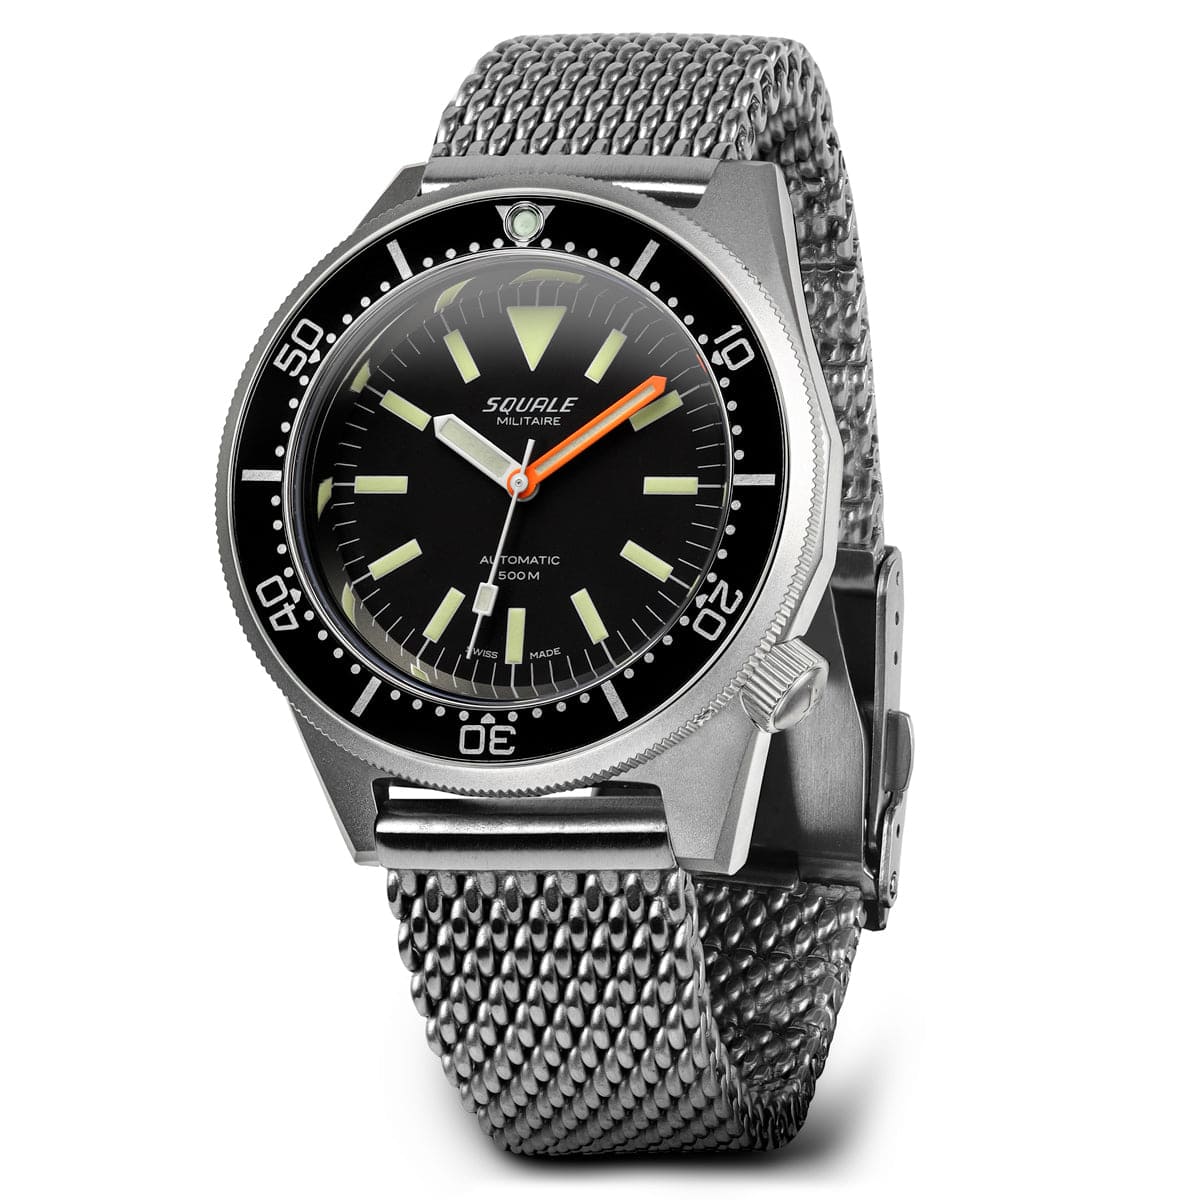 Squale 1521 Militaire Swiss Made Divers Watch - Blasted Case